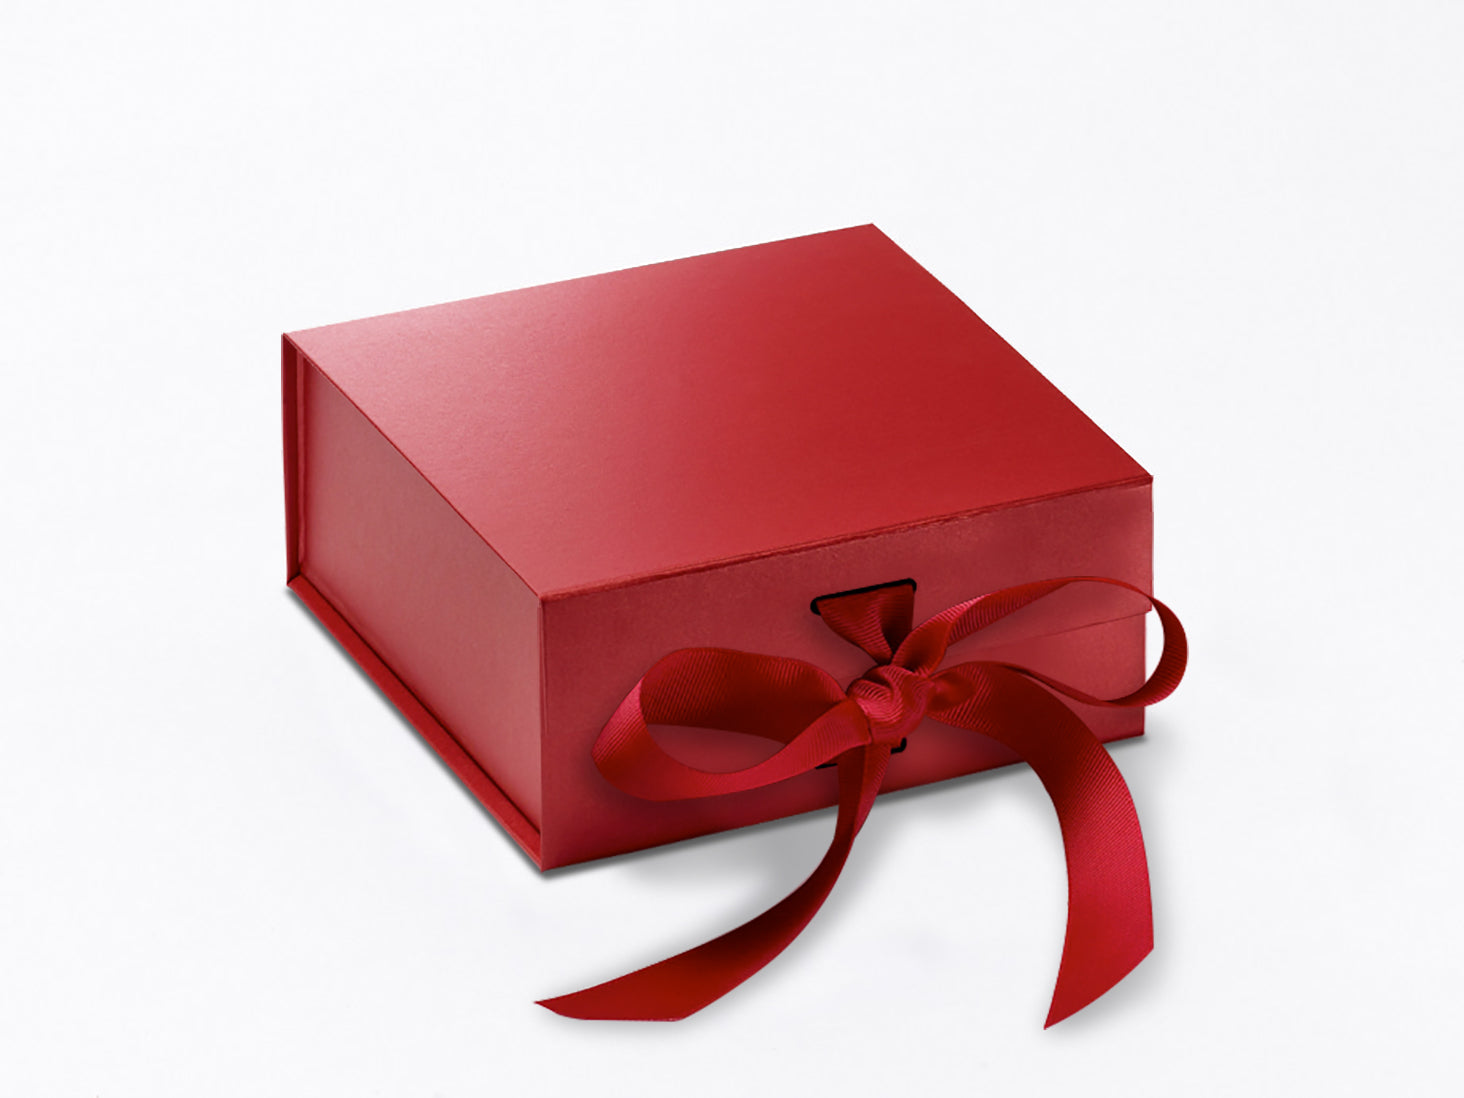 Sample Small Red Pearl Gift Box with ribbon ties from Foldabox USA